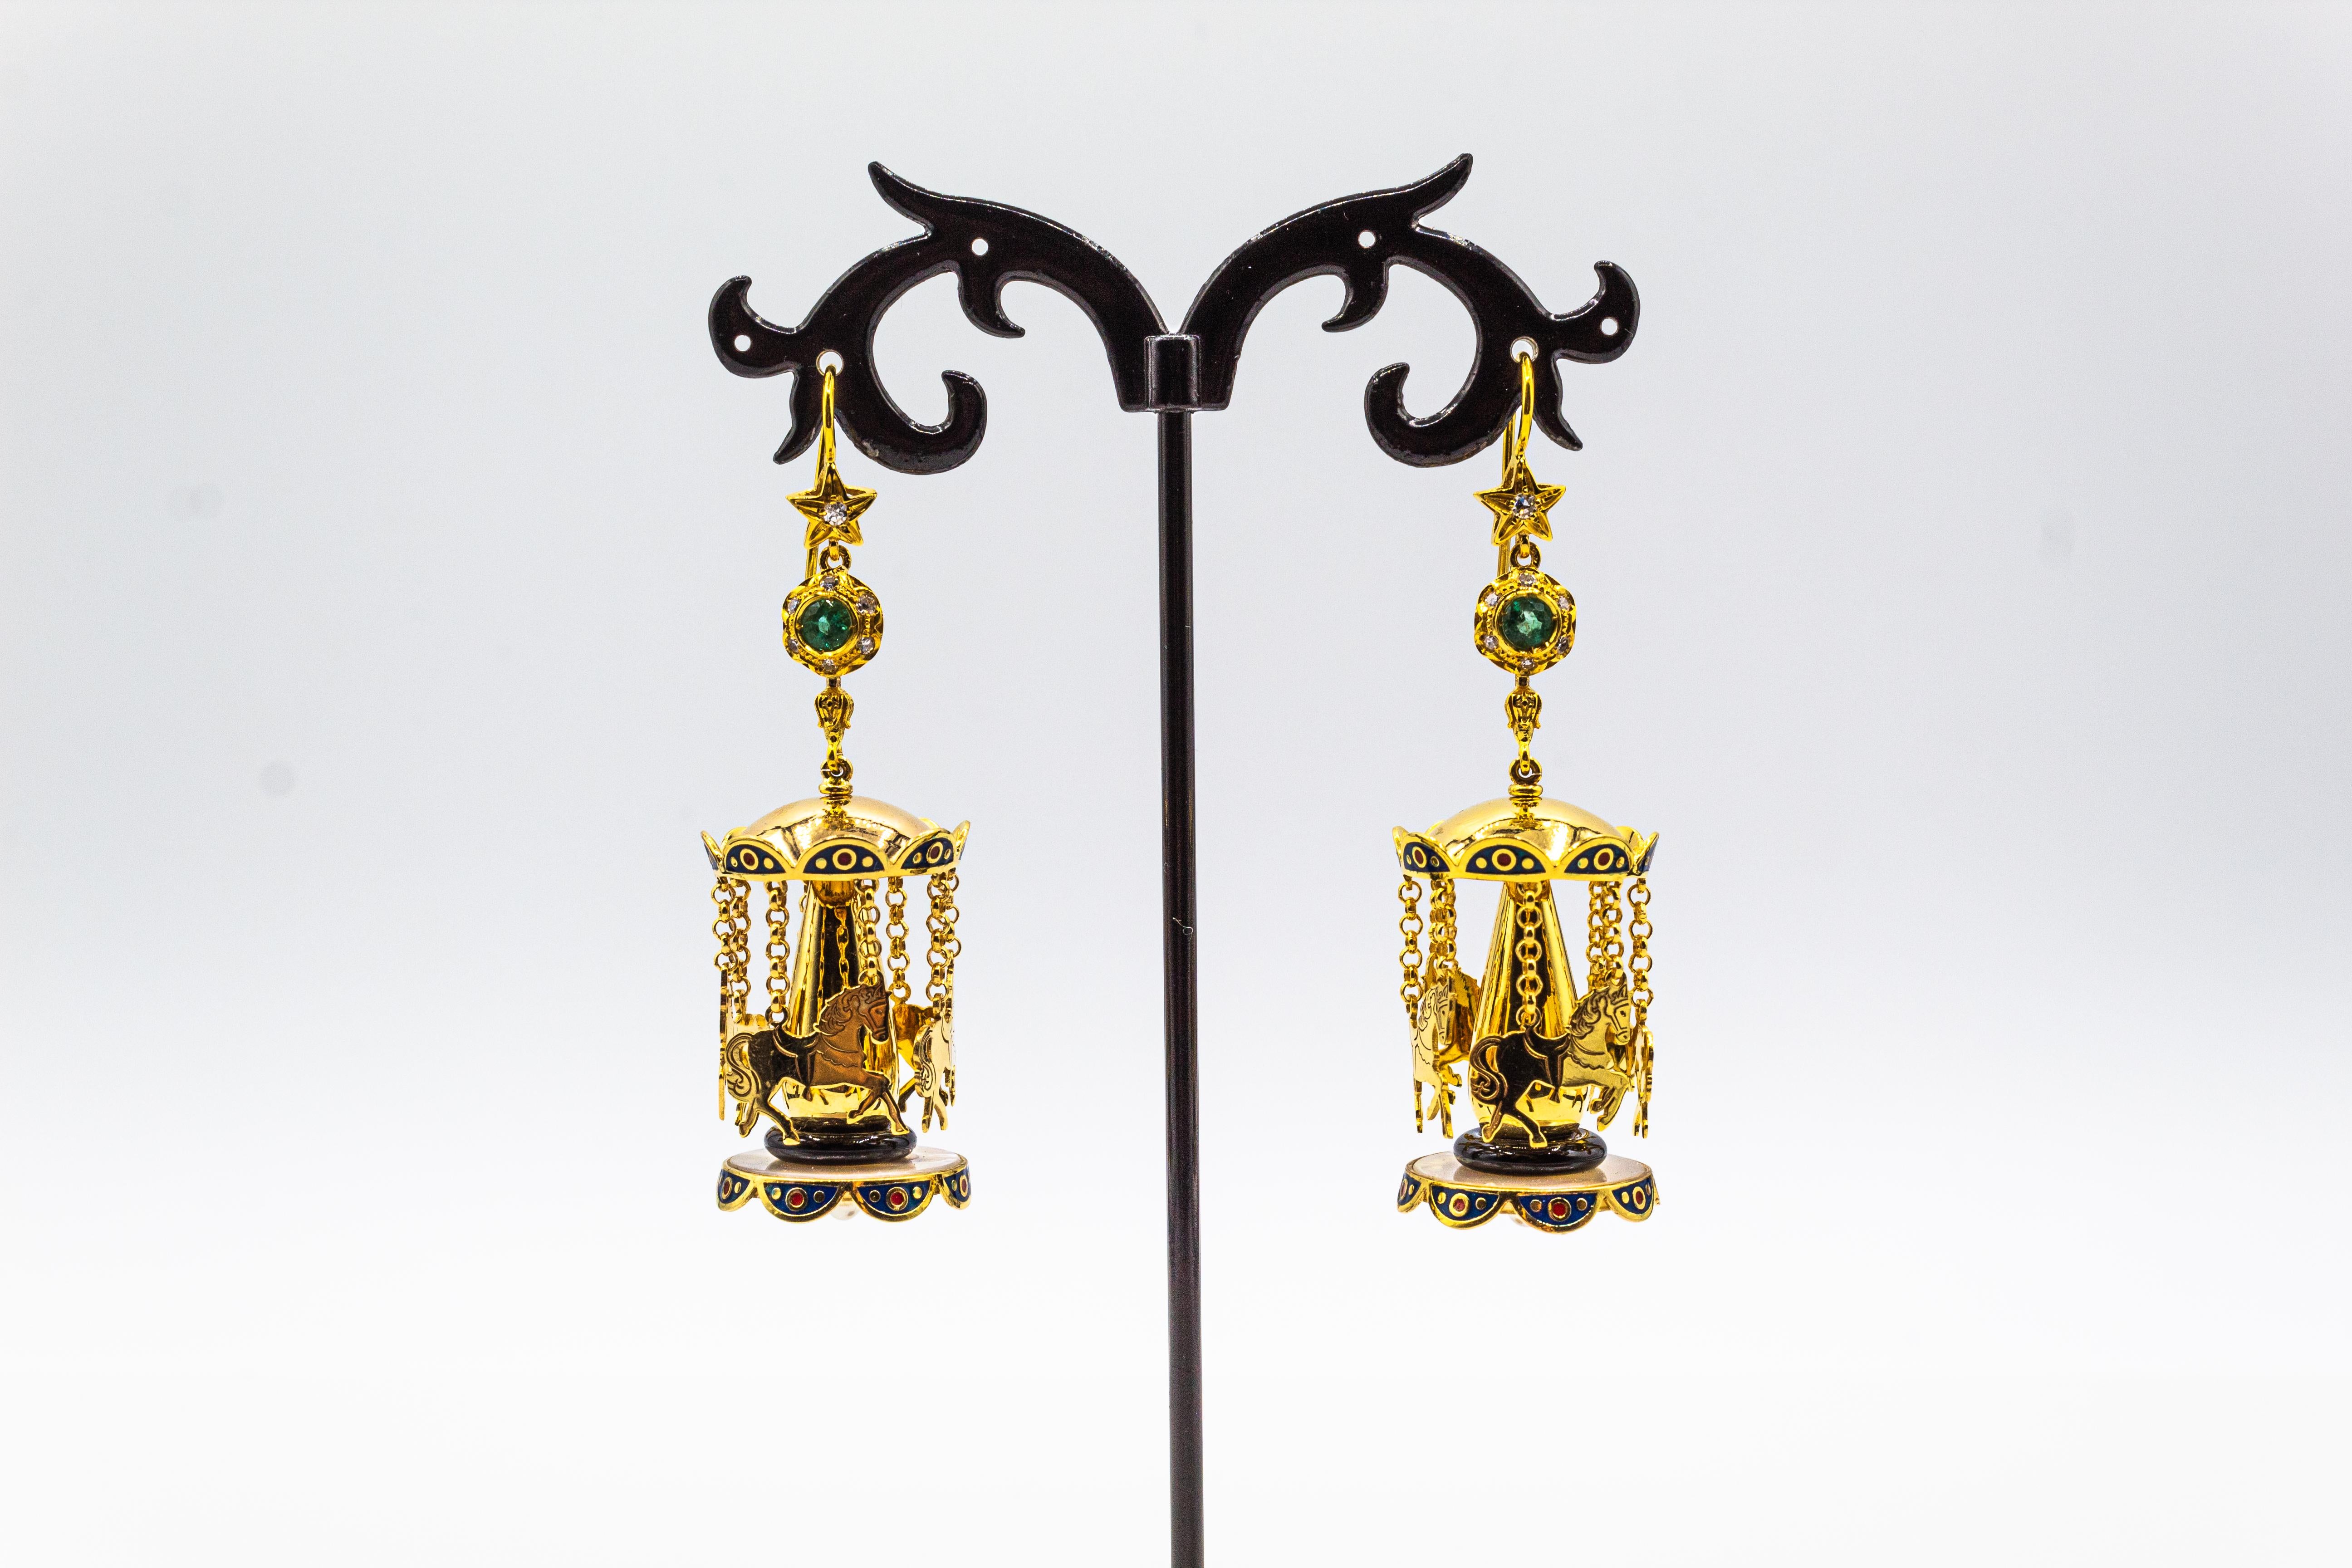 These Stud Earrings are made of 9K Yellow Gold.
These Earrings have 0.25 Carats of White Brilliant Cut Diamonds.
These Earrings have 0.50 Carats of Emeralds.
These Earrings have Mother of Pearl and Onyx.
These Earrings have also Enamel and